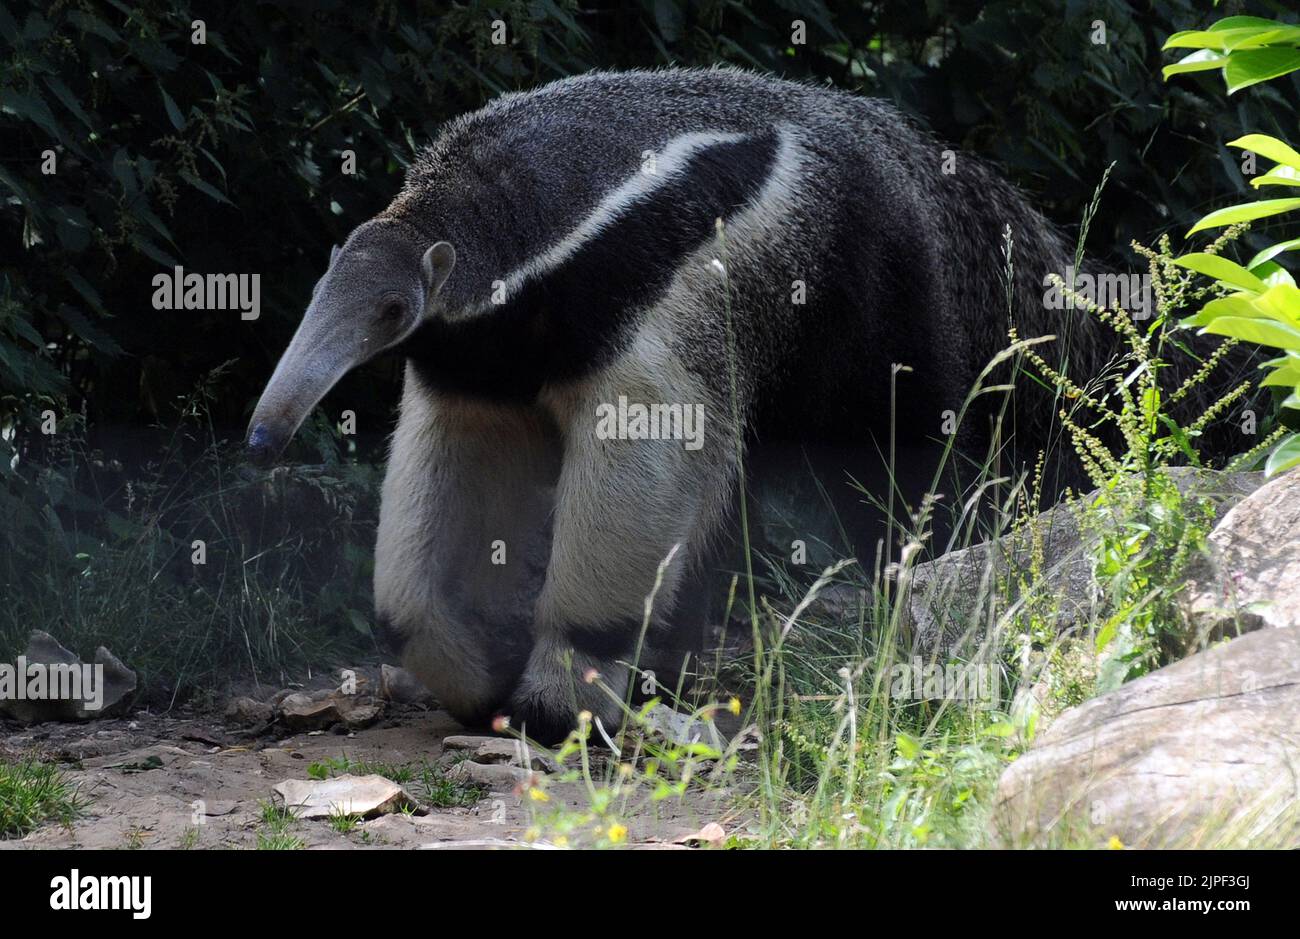 GIANT ANTEATER, MARWELL ZOO, HAMPSHIRE MIKE WALKER PICTURES, 2011 Stock Photo